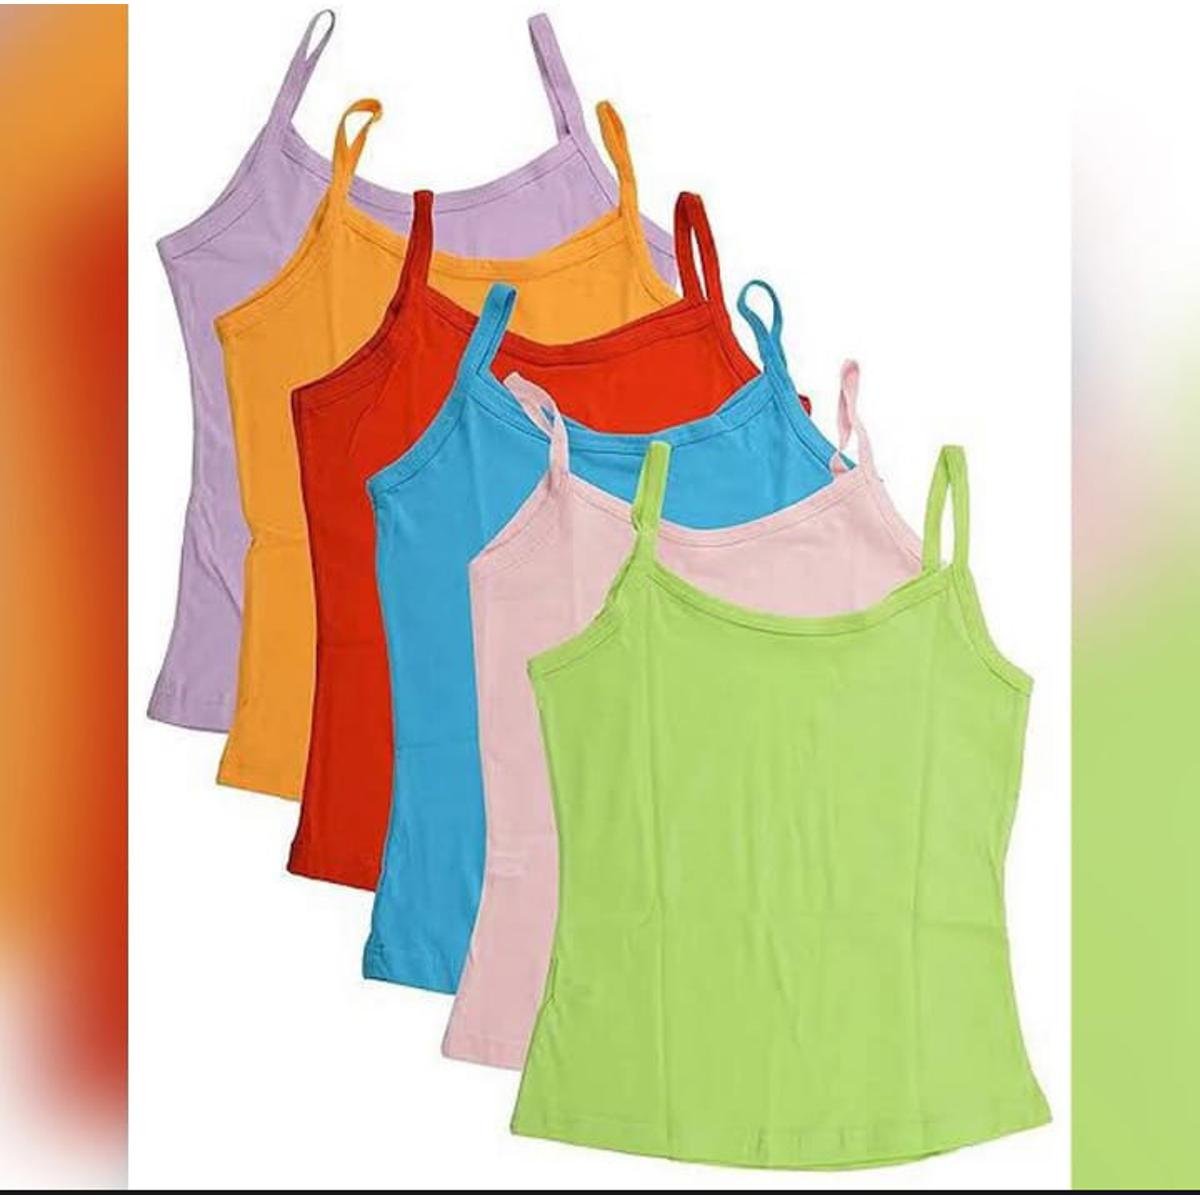 1 pcs High Quality bra system Tops For Women / Sexy Ladies Tank tops /  Multicolor Semis for Women / Cotton Ladies Ganjy bra for Teenager girls